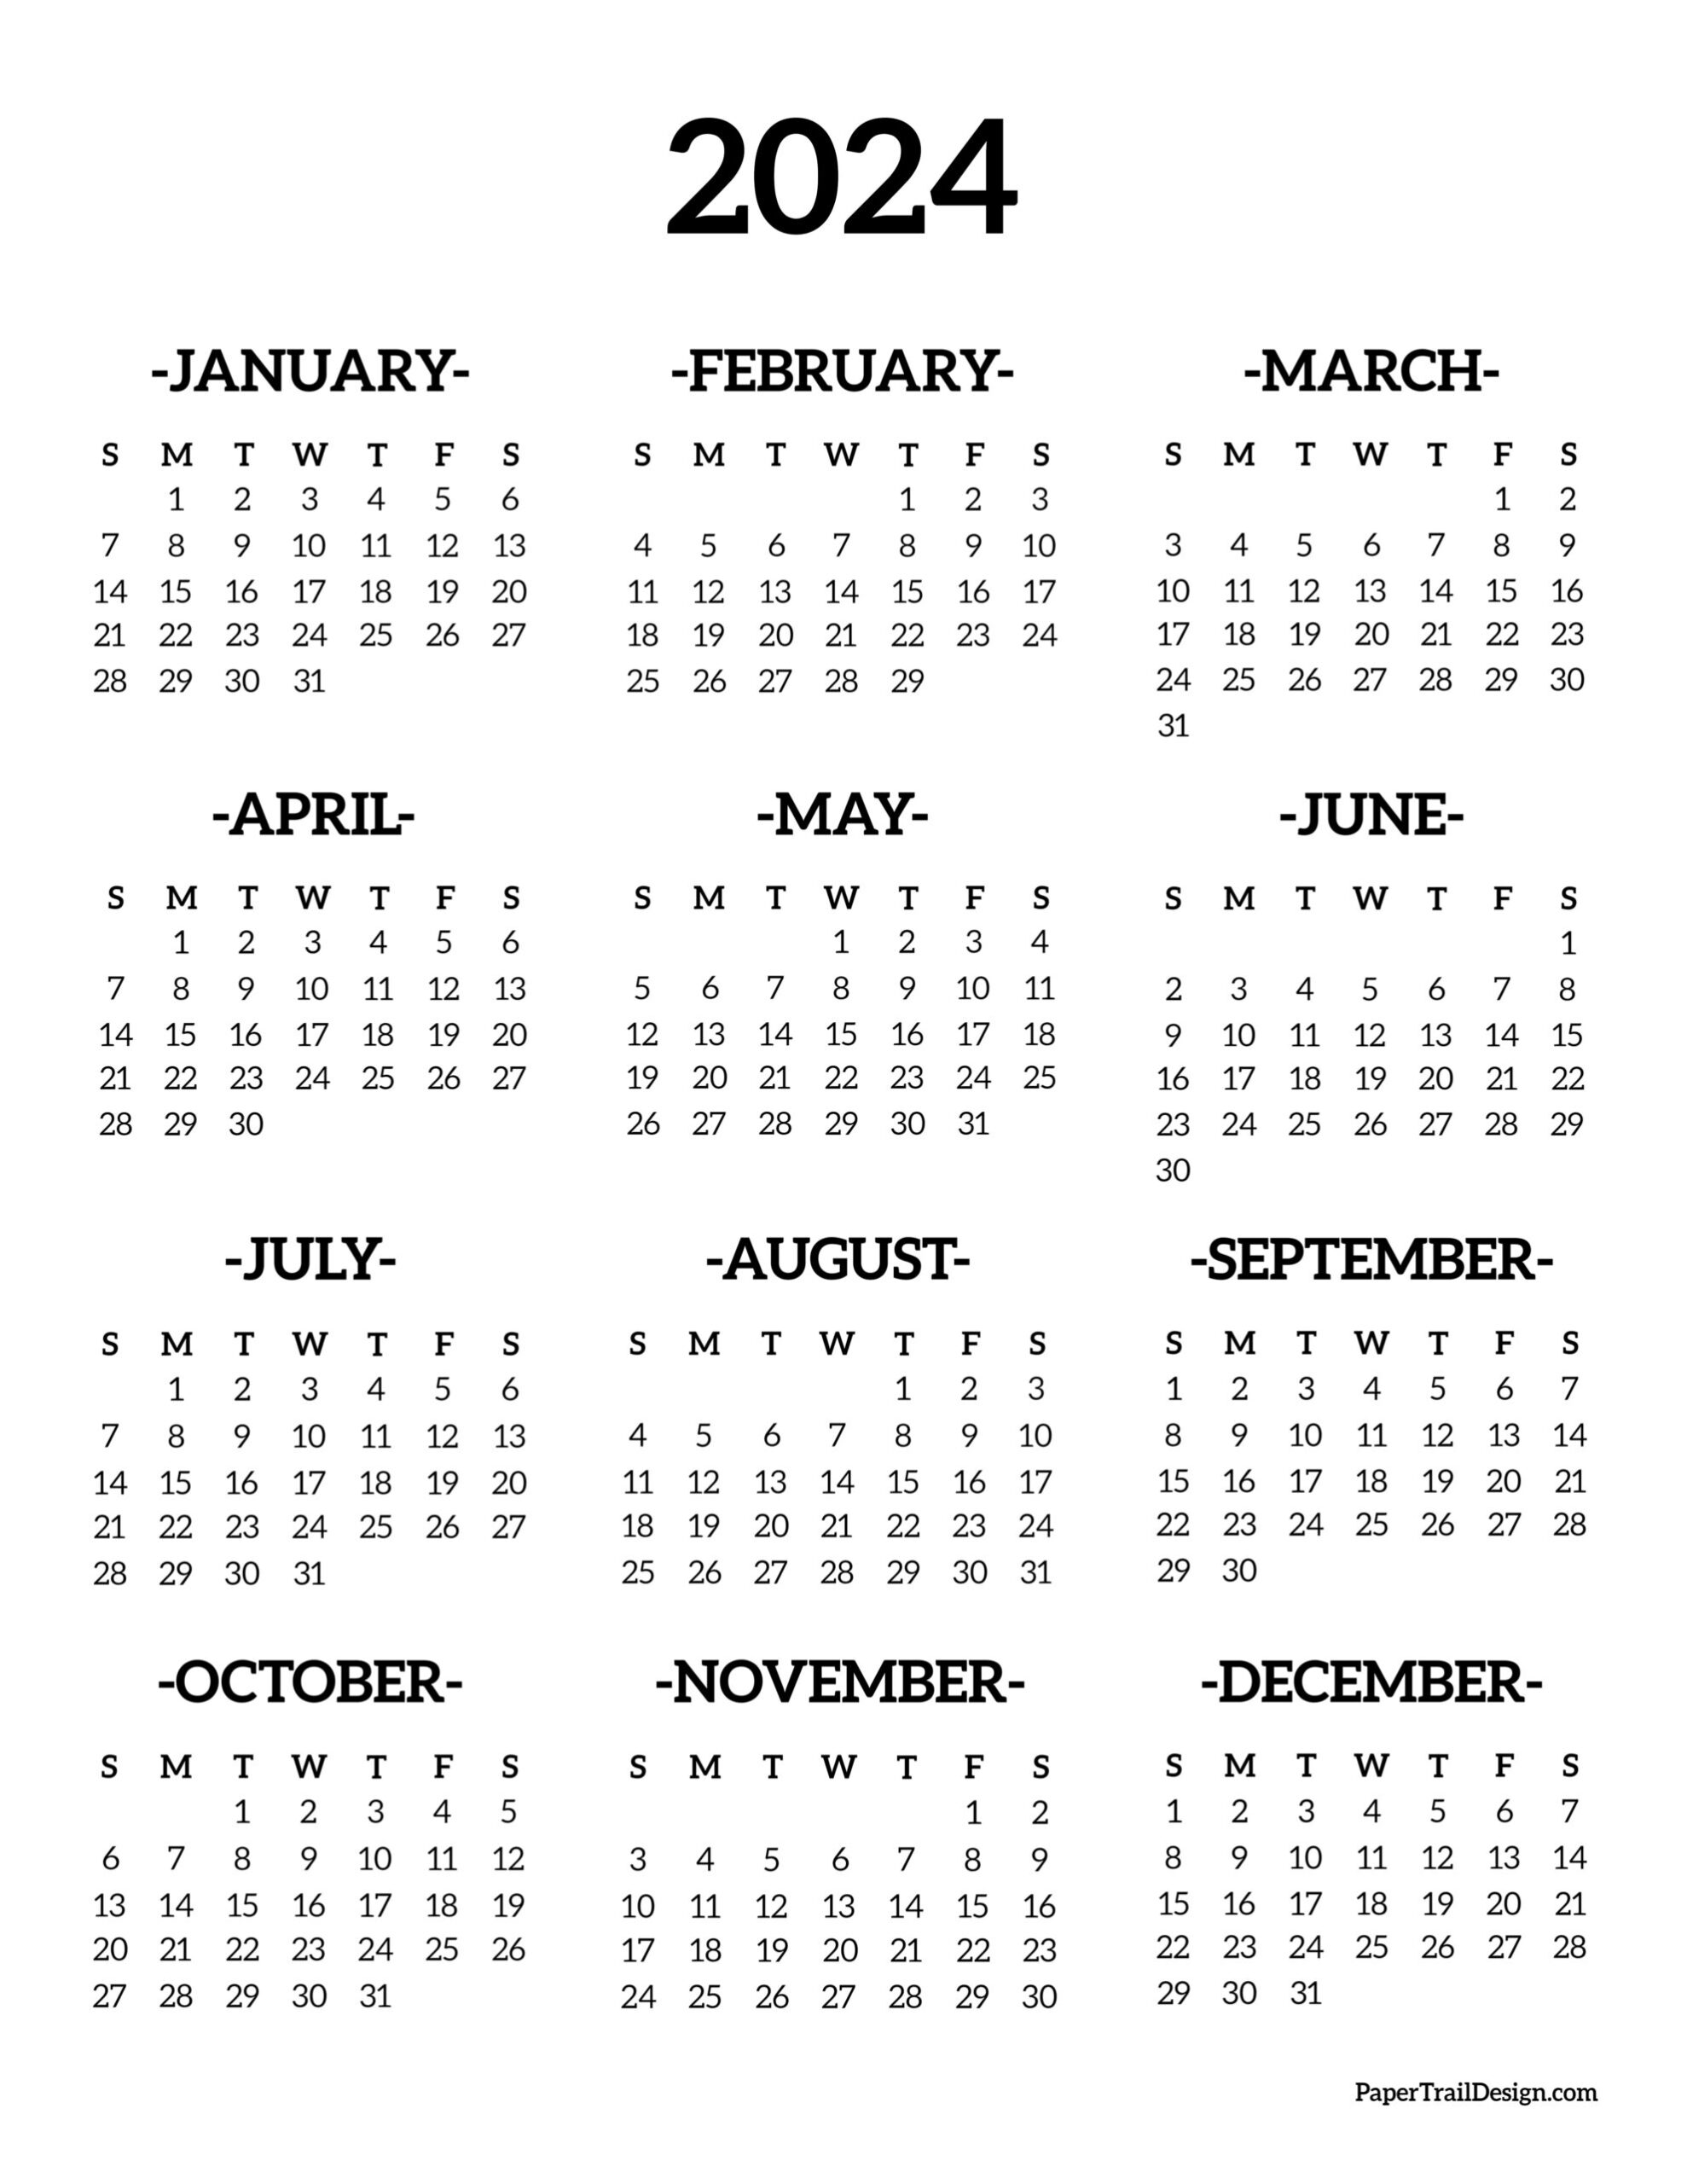 Calendar 2024 Printable One Page - Paper Trail Design for Printable Calendar Year 2024